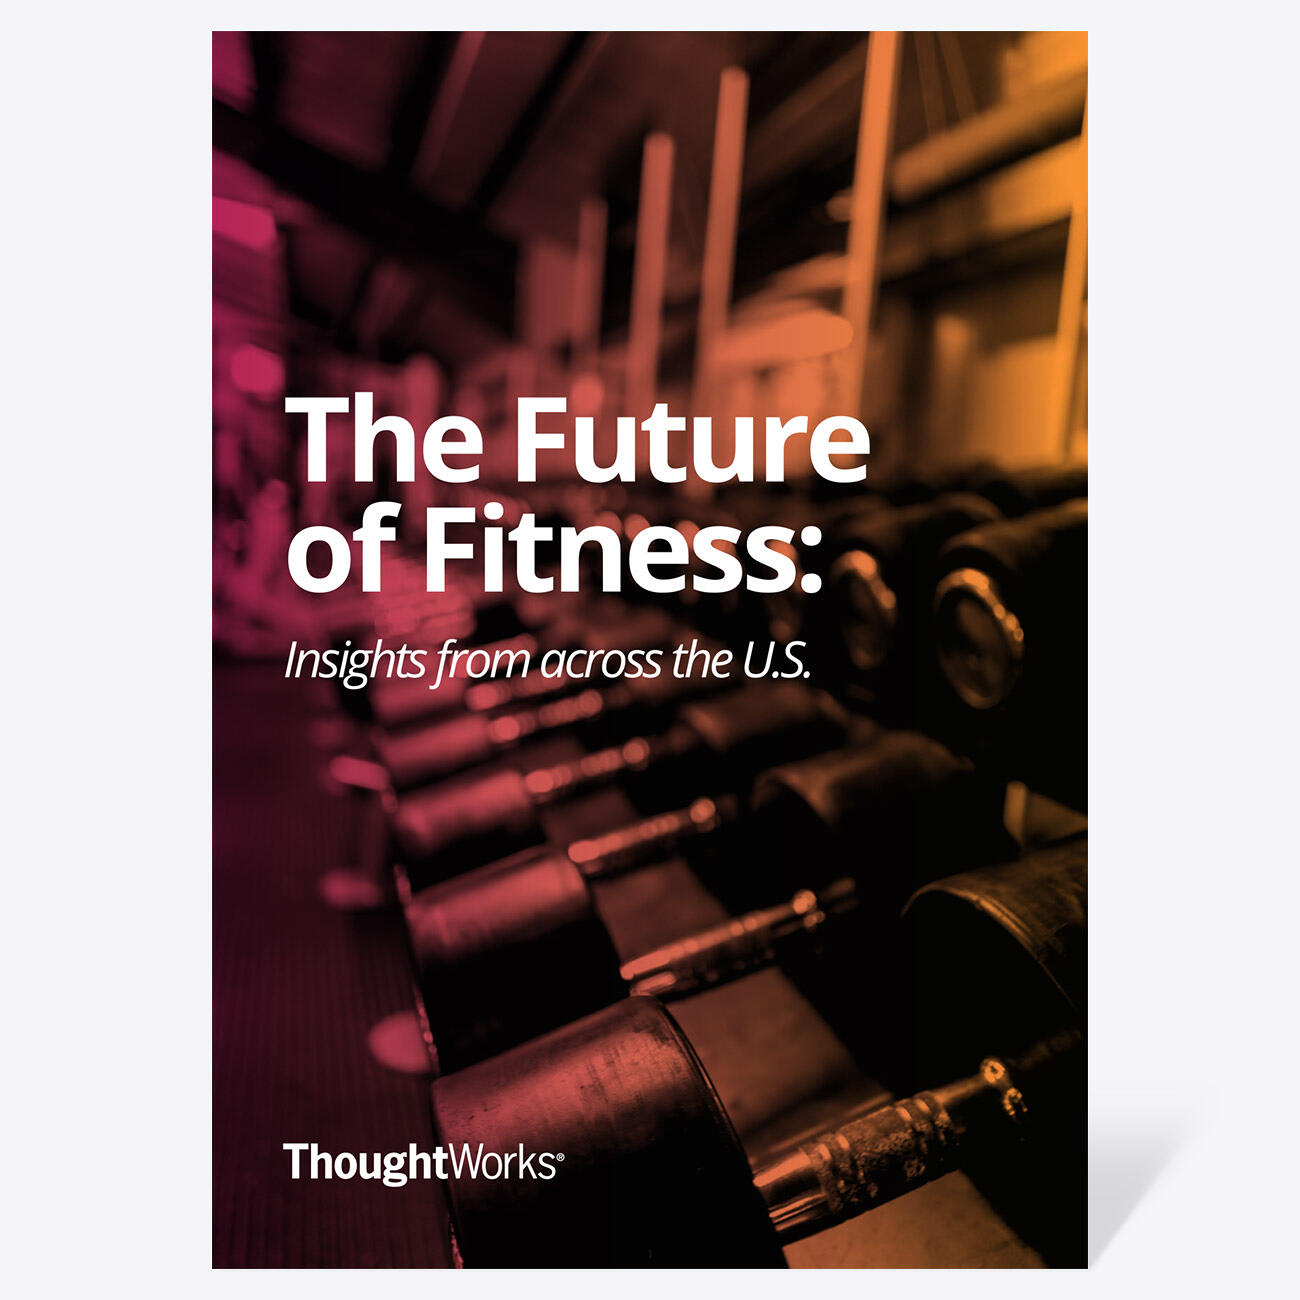 The future of fitness: insights from across the U.S.